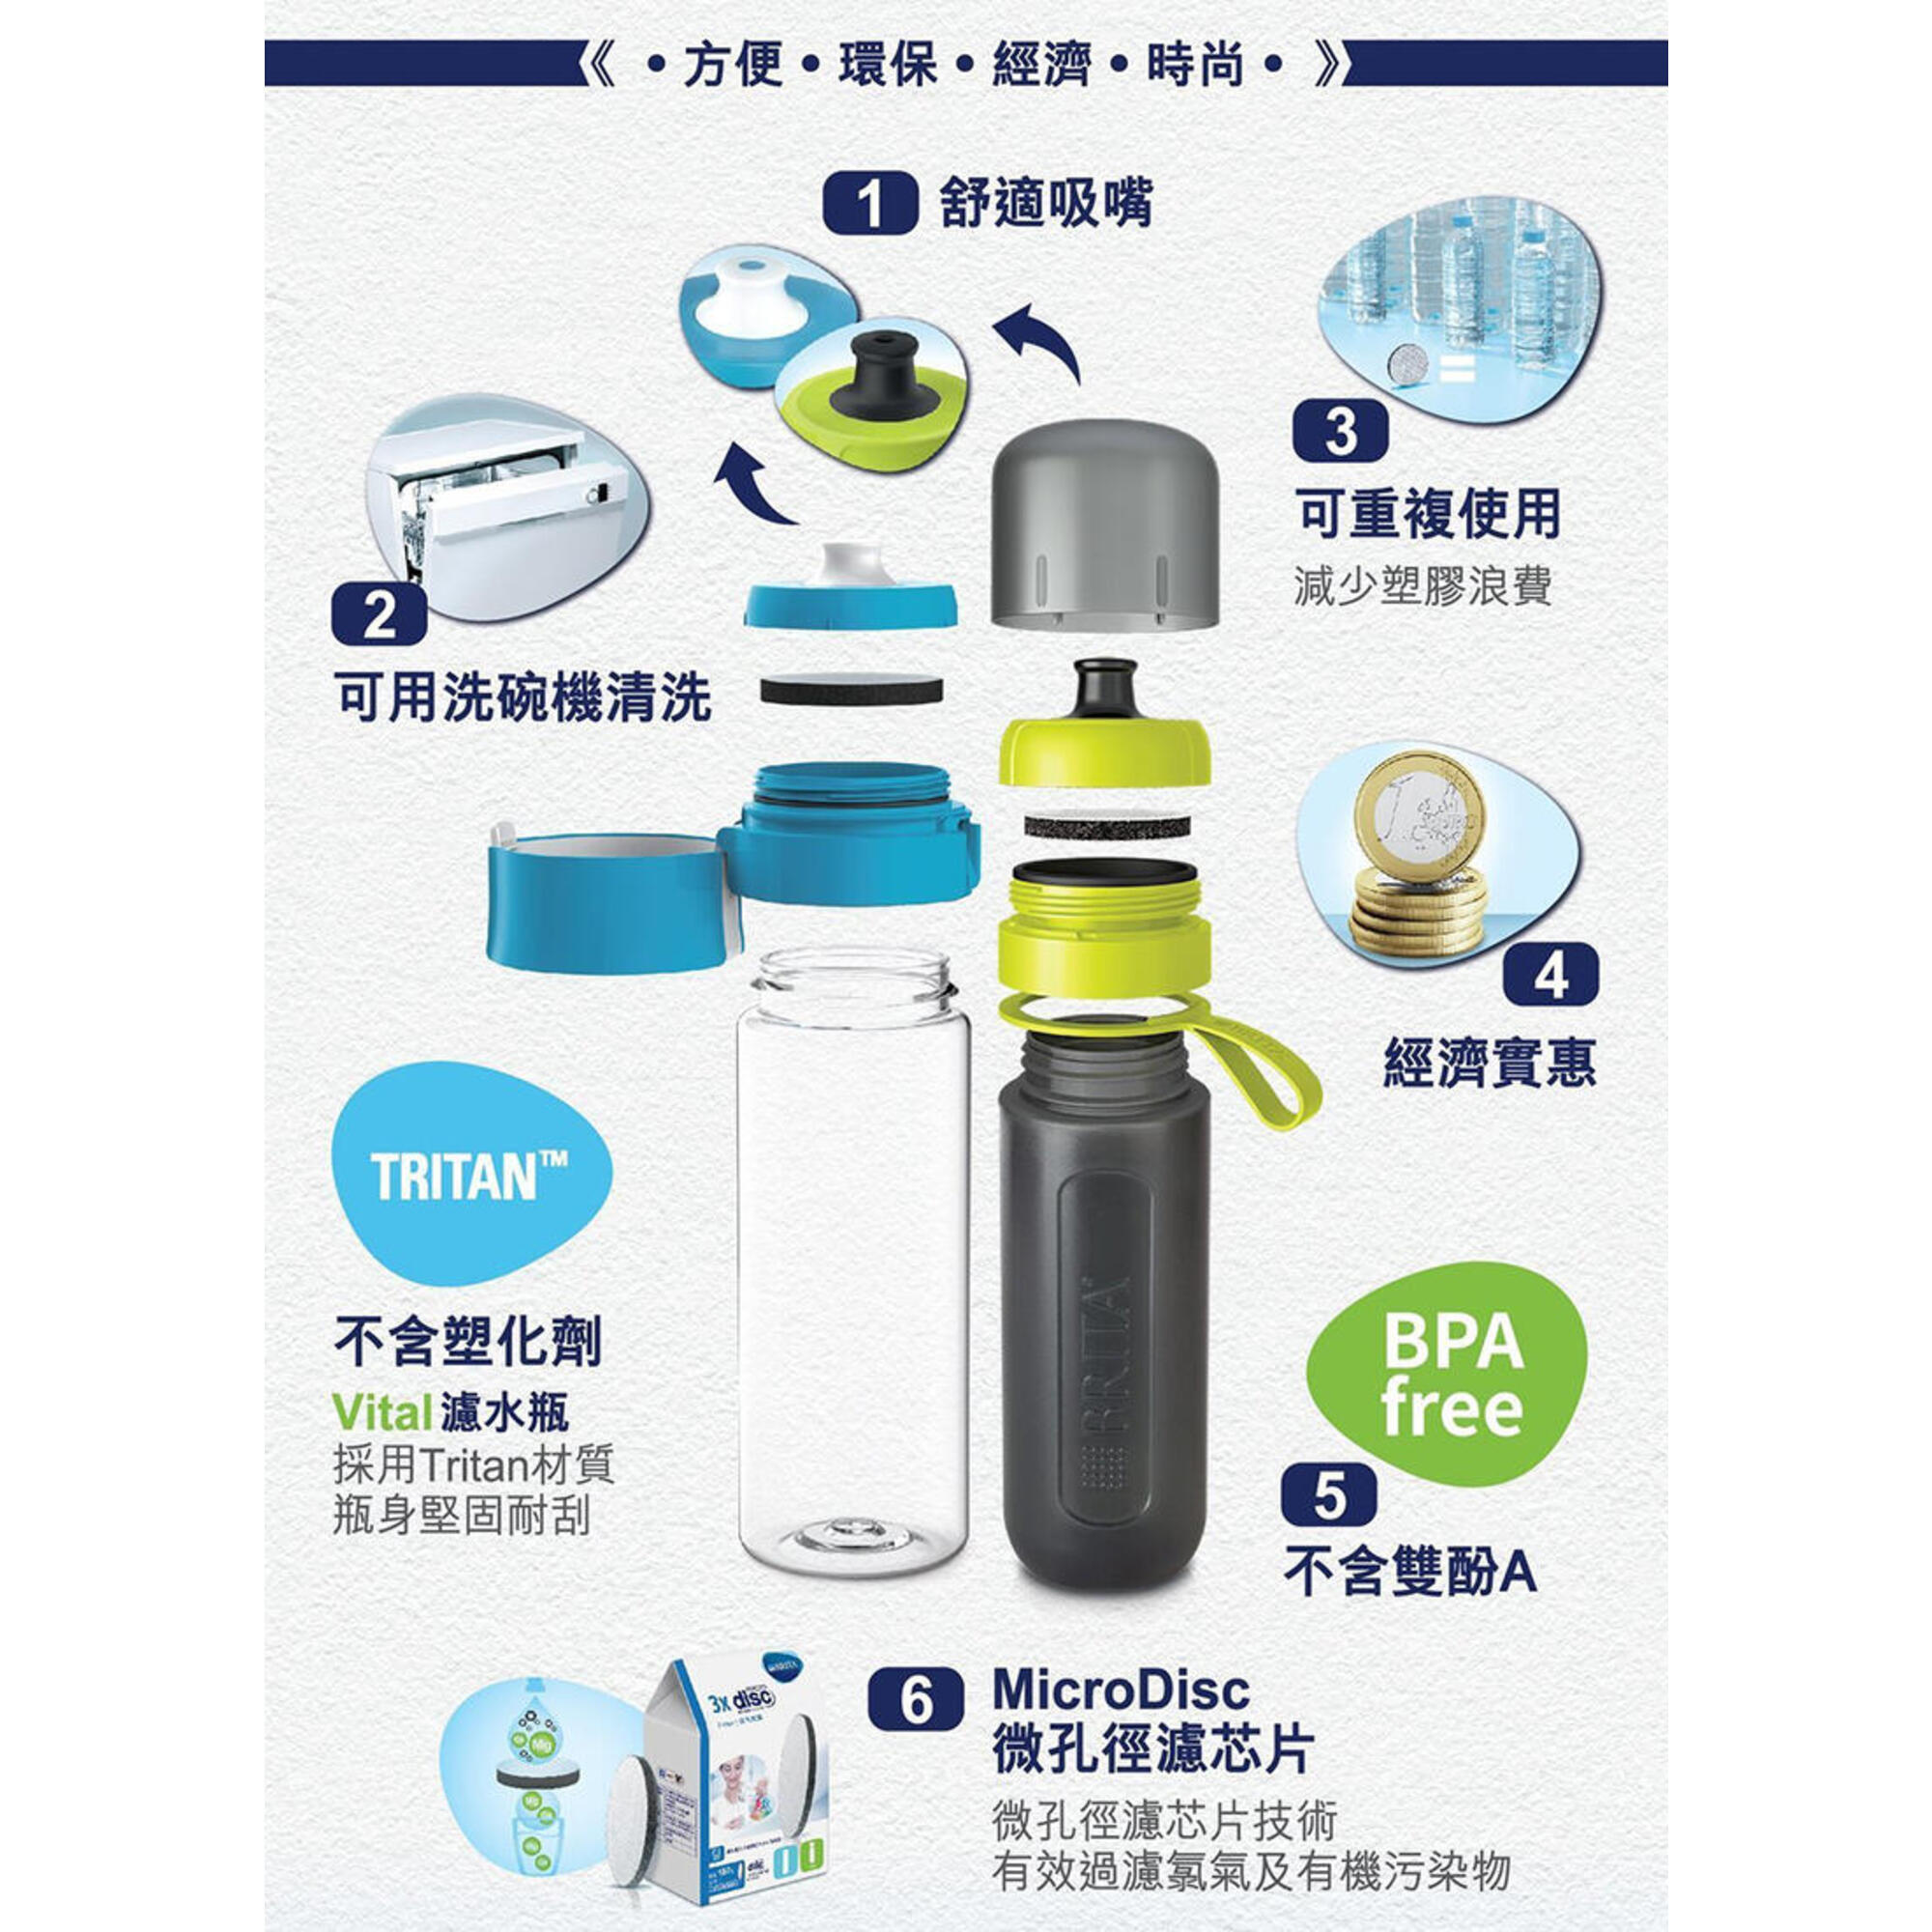 Active Water filter bottle  - lime